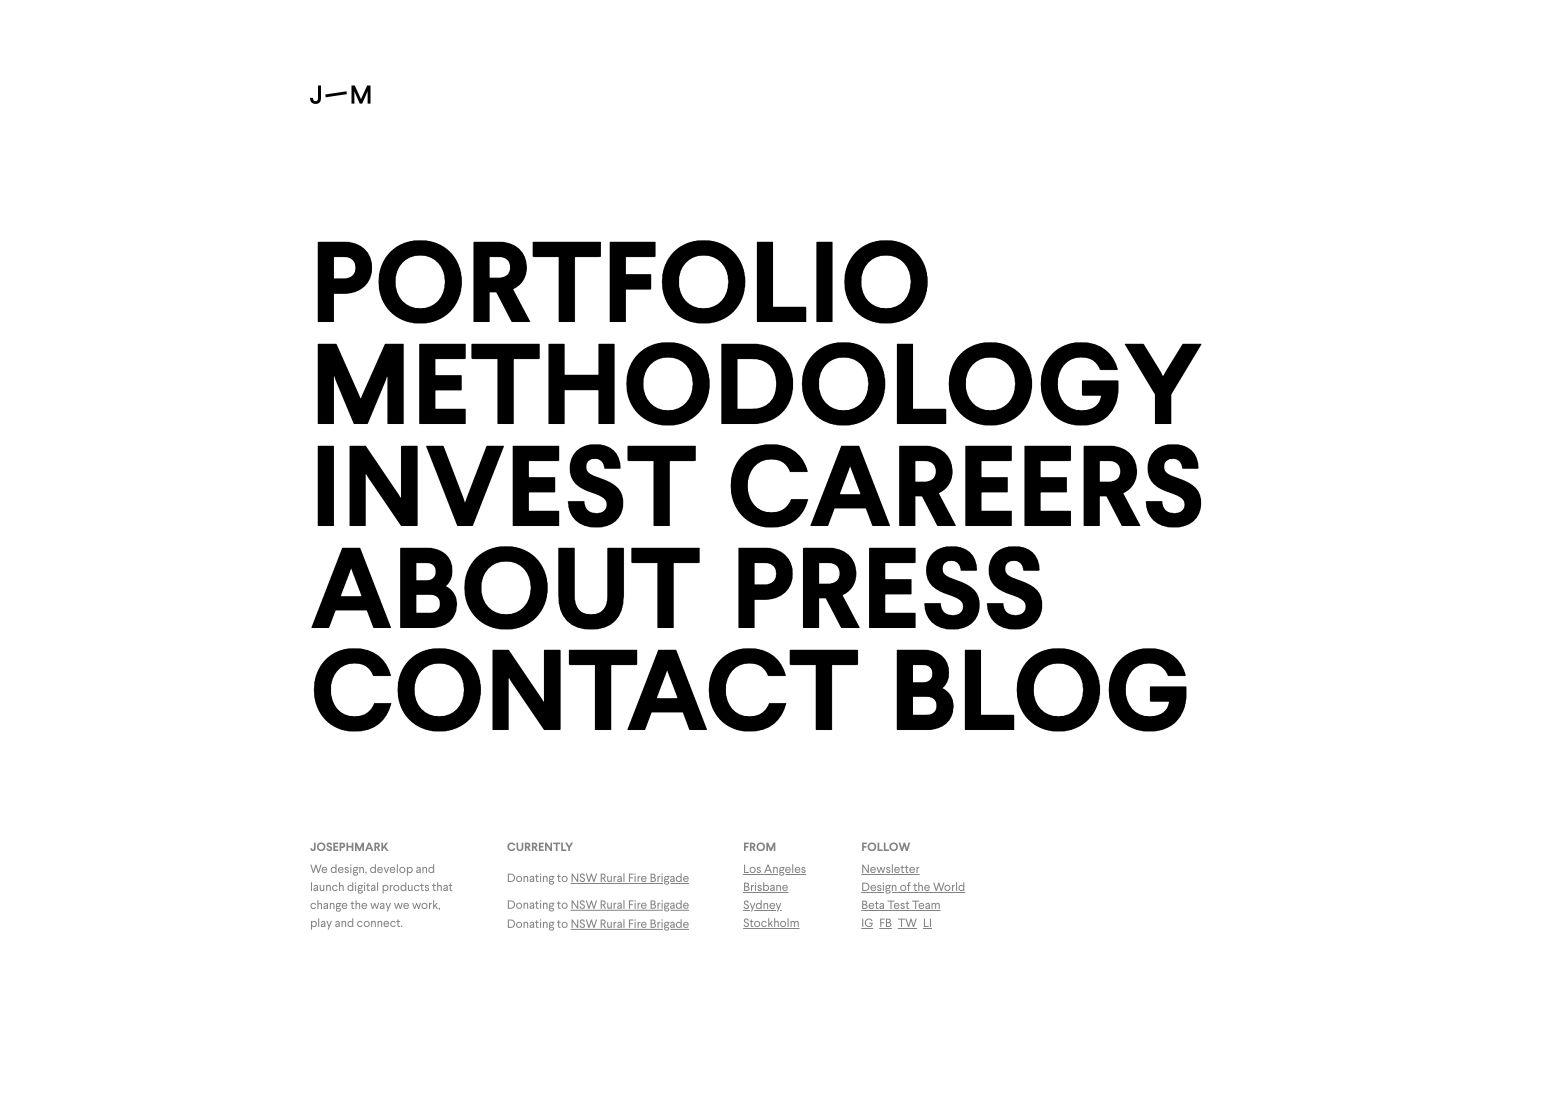 Website best practices: big typography is eye-catching and easy to read